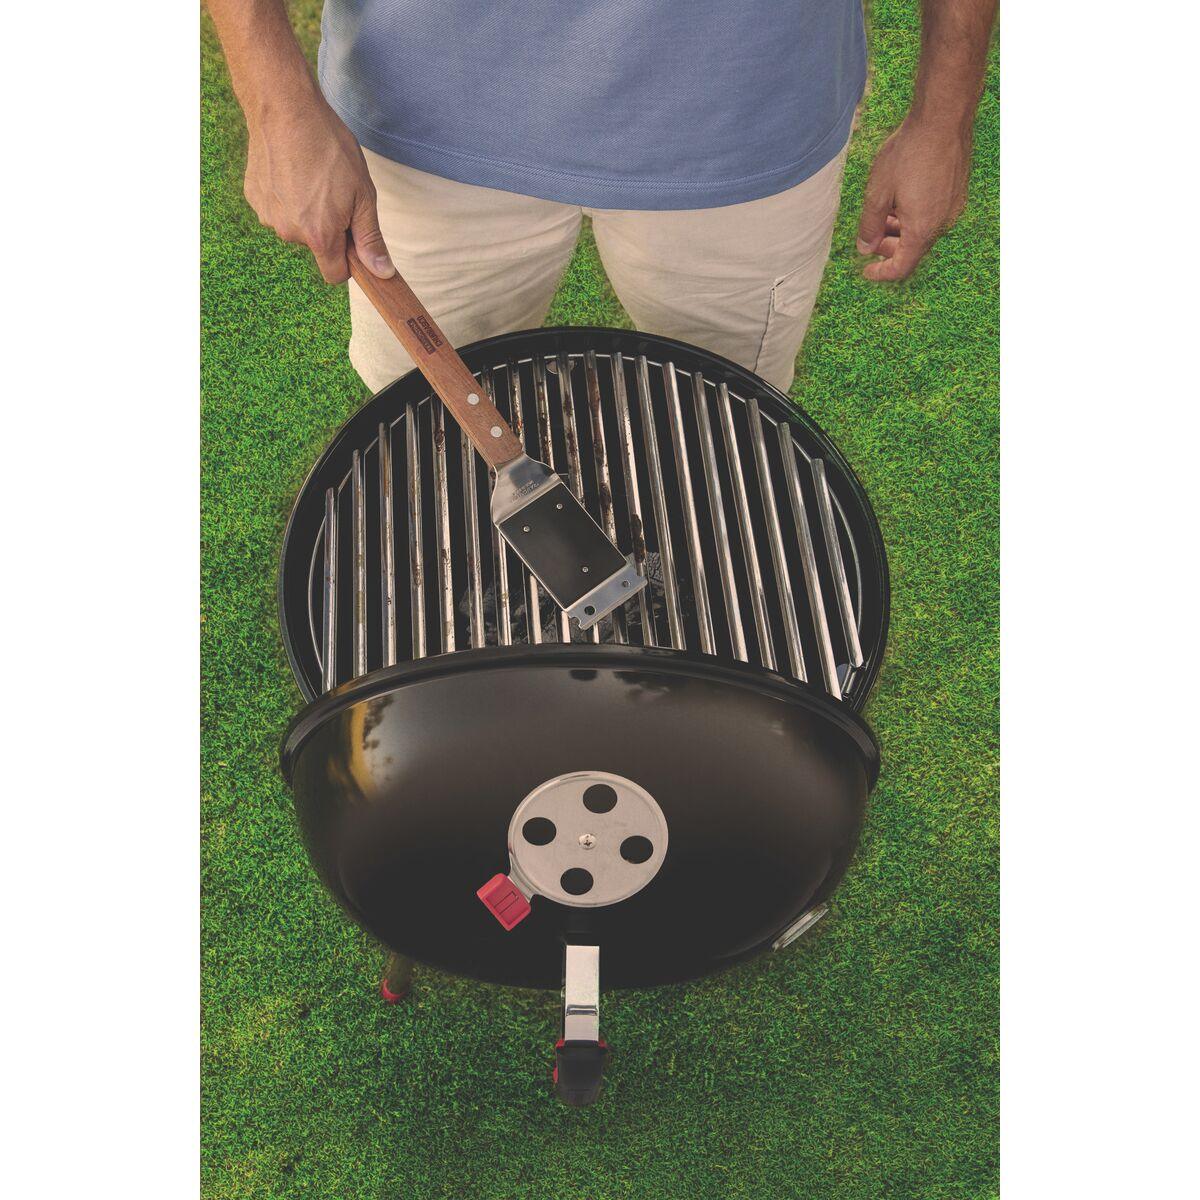 Tramontina TCP-450L Portable Charcoal Grill with Lid | 26500/009 (7524481630396)